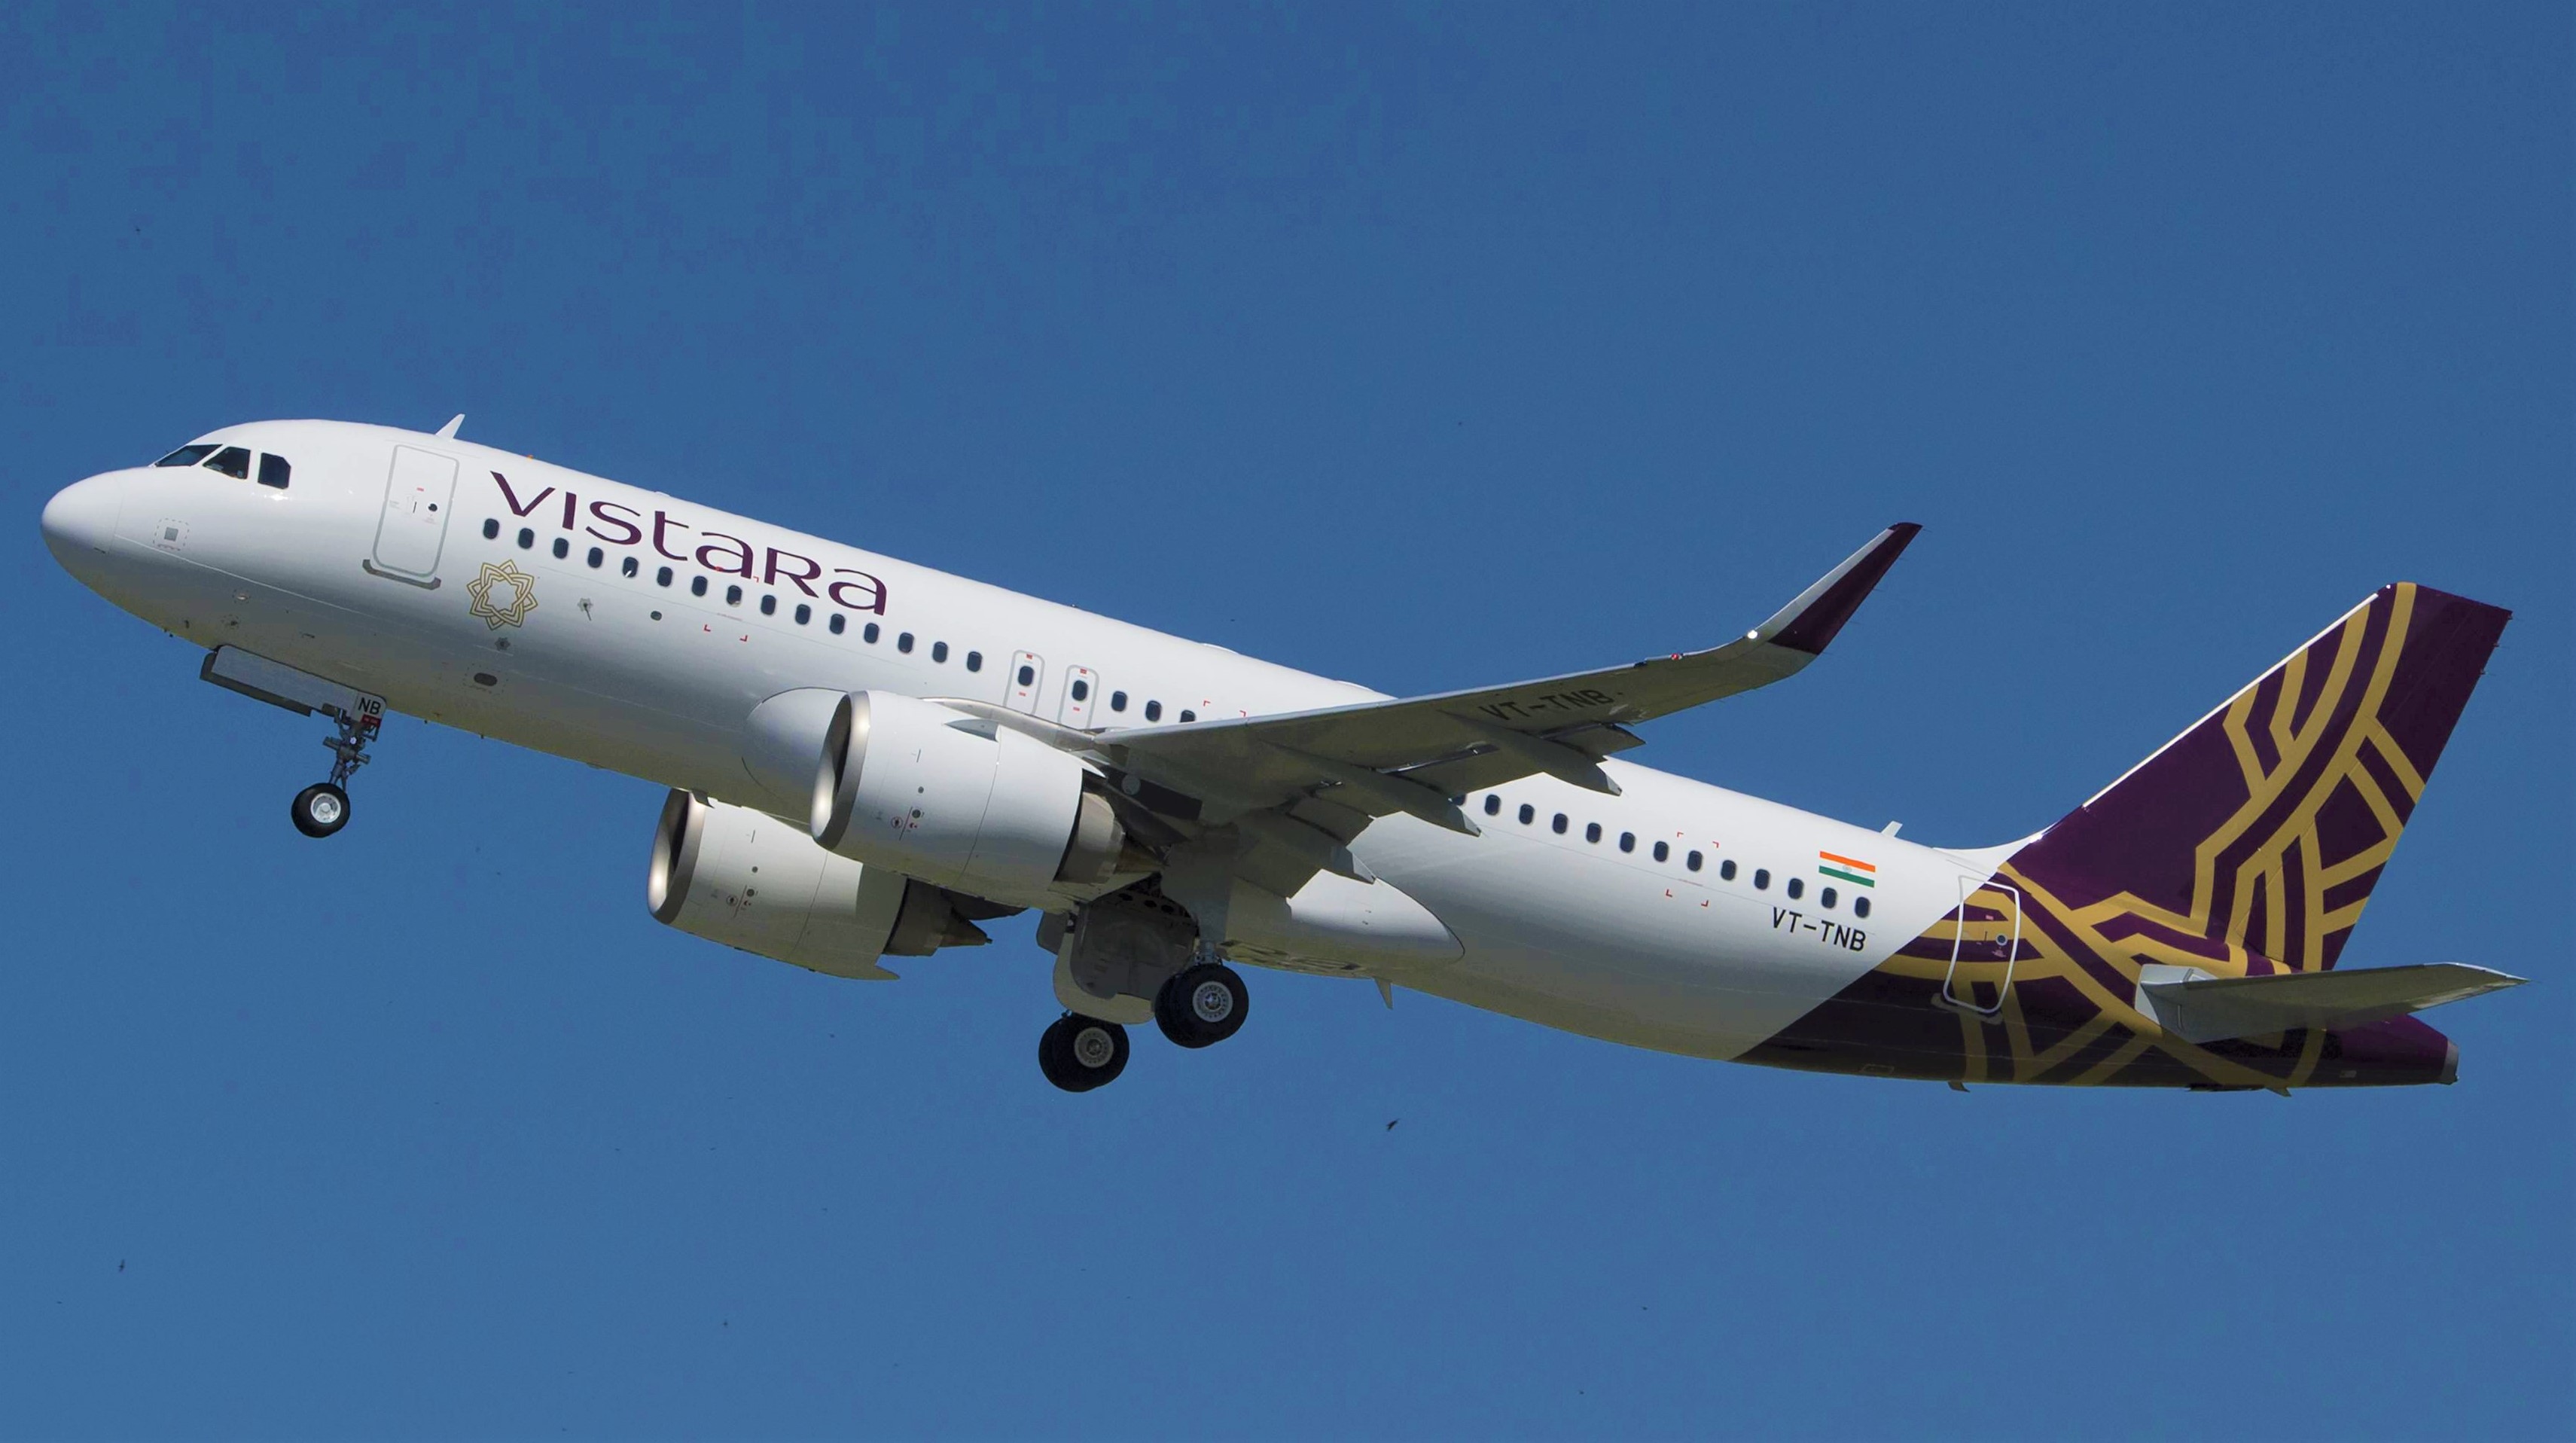 Job Opening Alert - Indian Carrier Vistara is Hiring  for Dreamliner First officers  and  Technical  staffs  for  it's India Operations . 